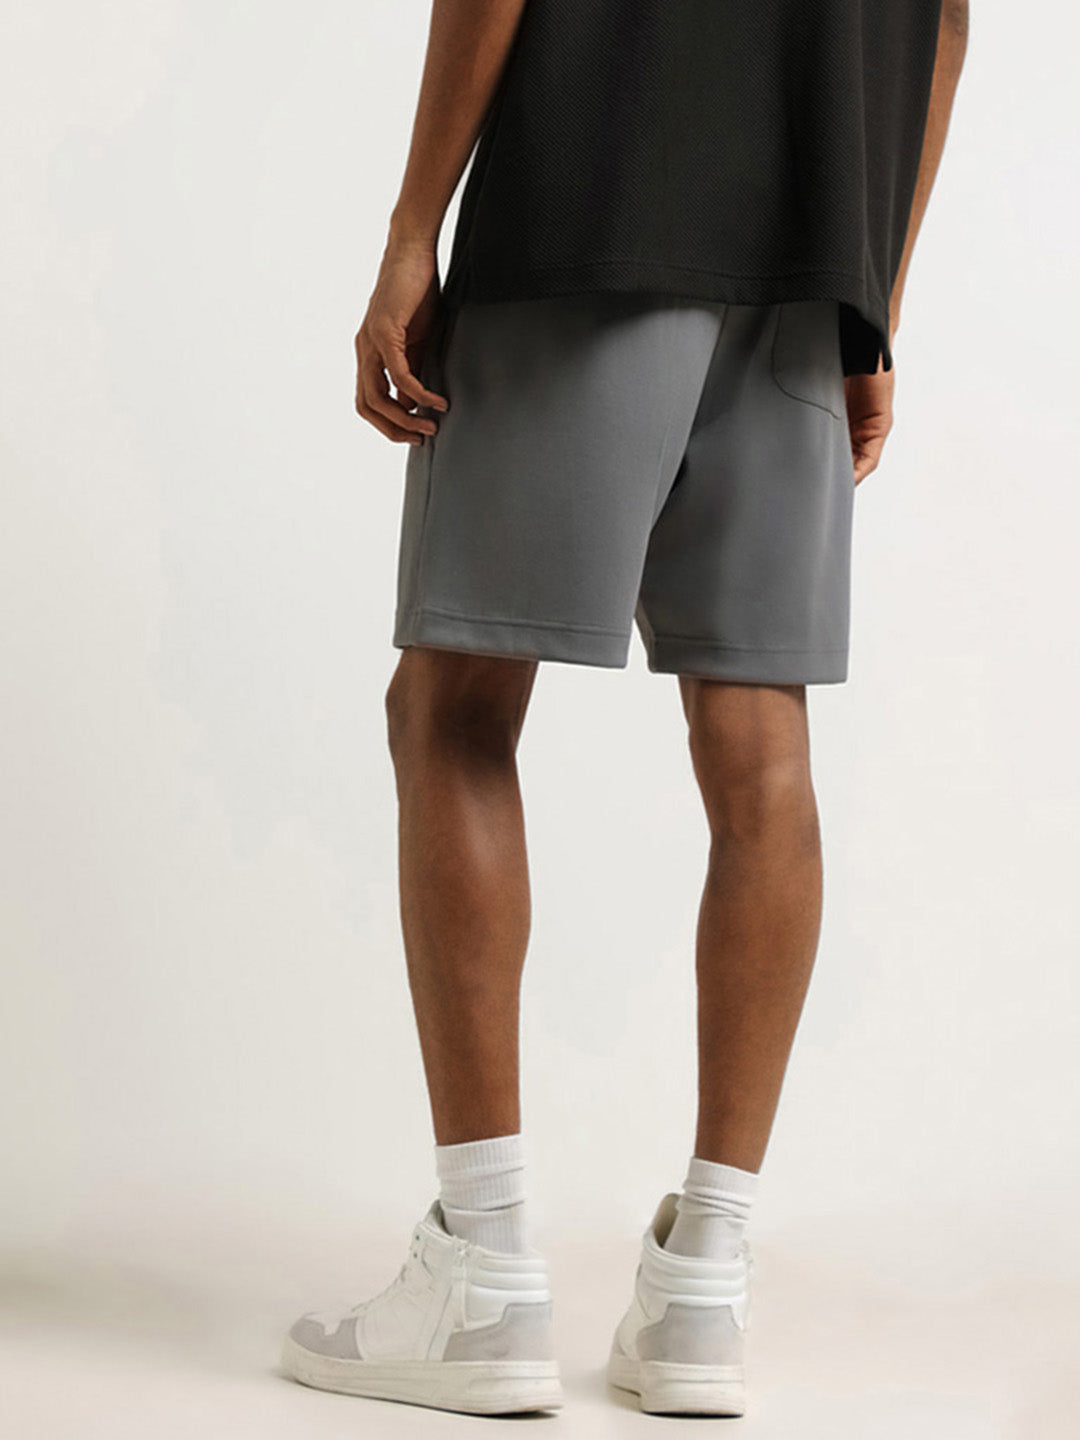 Studiofit Grey Self Patterned Cotton Blend Relaxed Fit Shorts